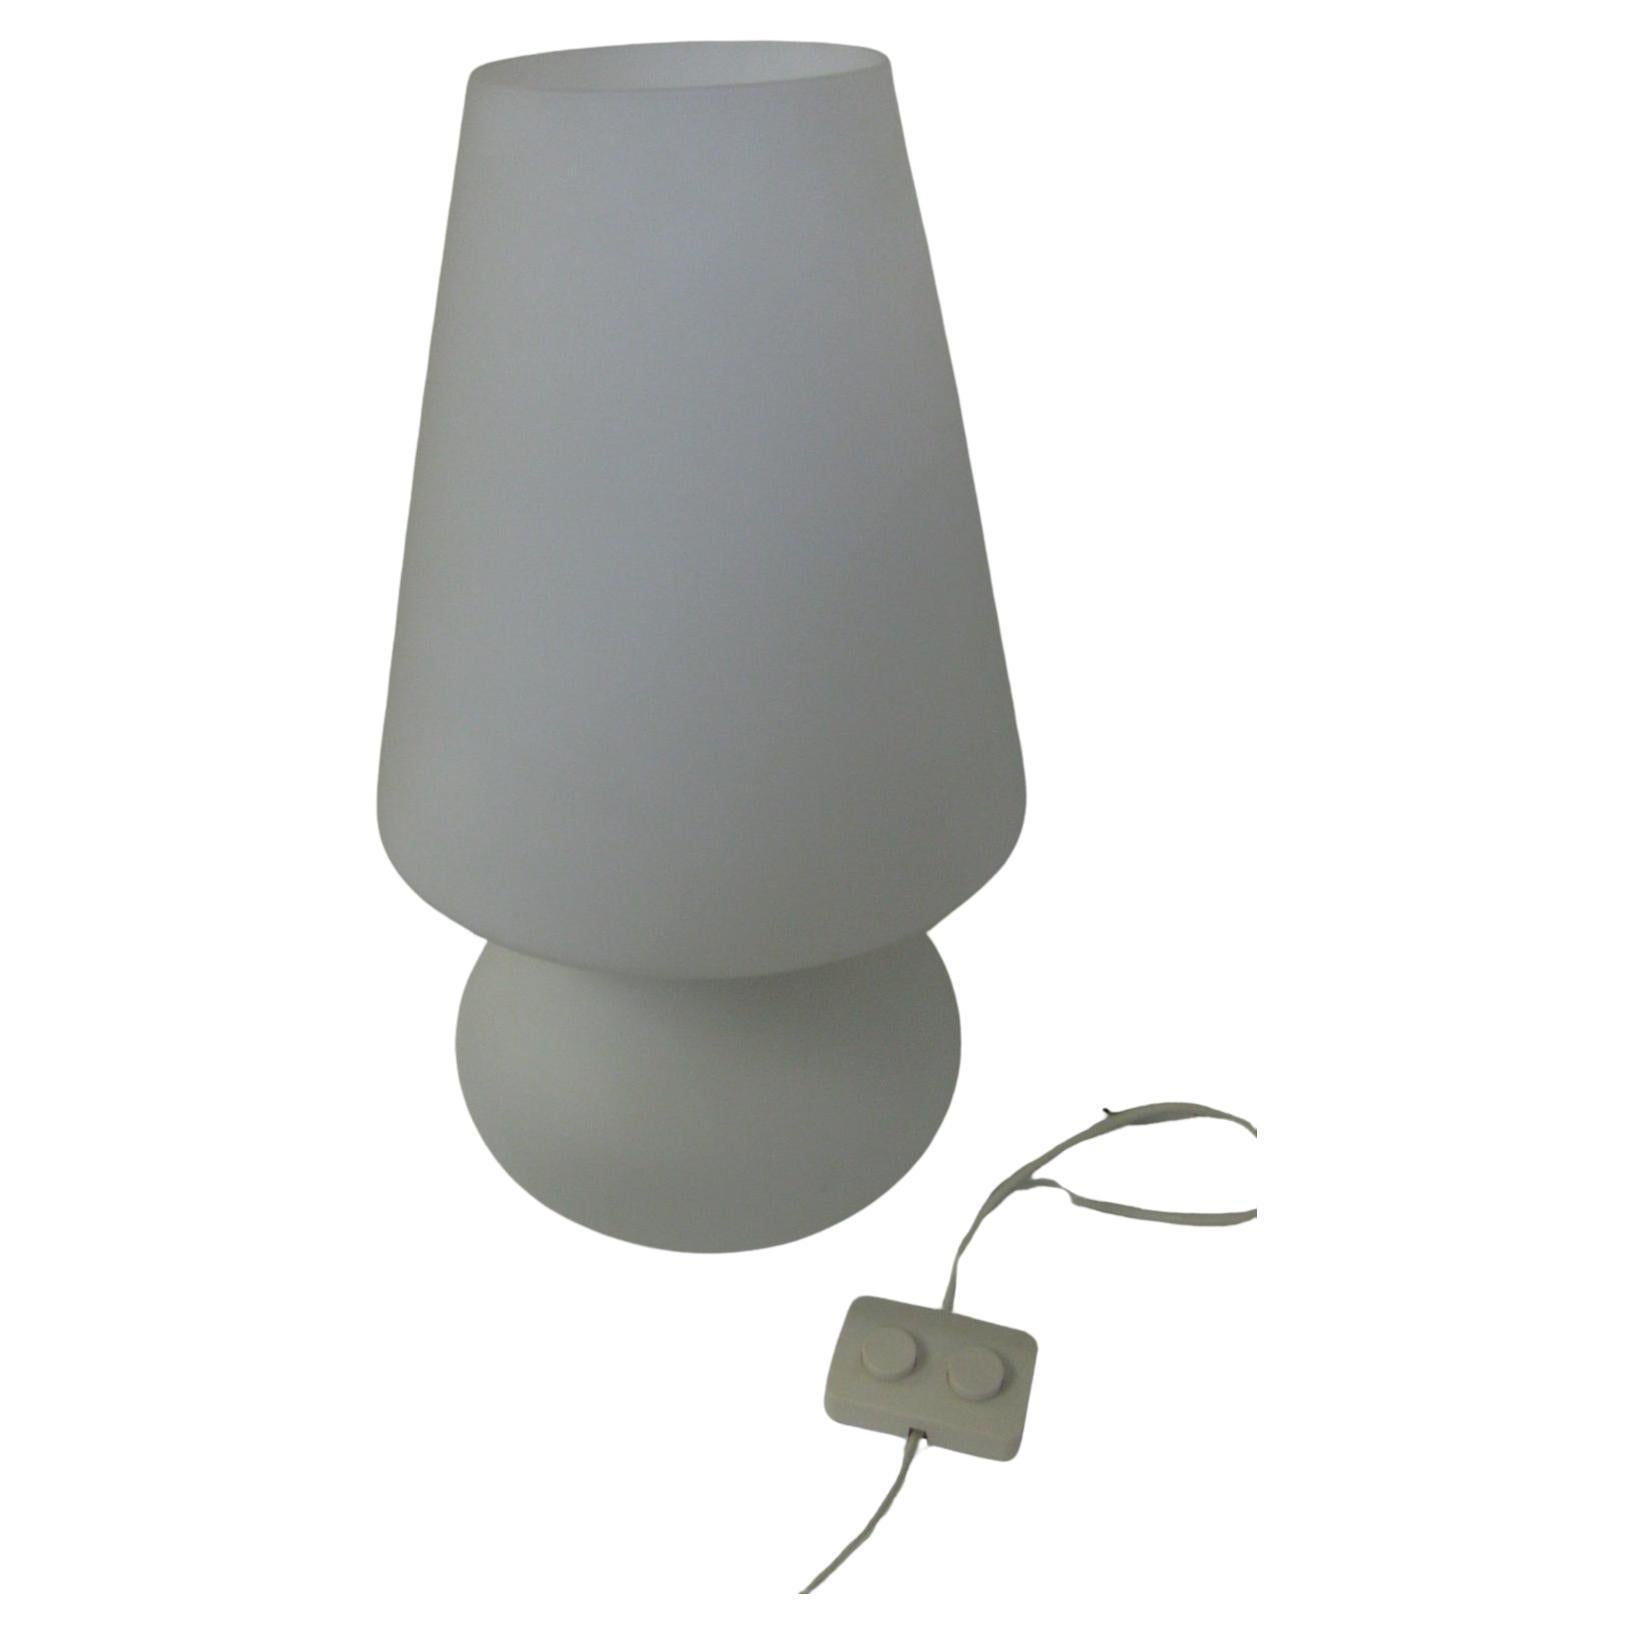 Fabulous one piece mushroom lamp base with shade. Has a lamp socket in the base as well as the shade with a separate switch for either. Frosted glass emits a warm pleasant glow when lit. Tall and elegant, wiring is sound. Picture with bottom, base